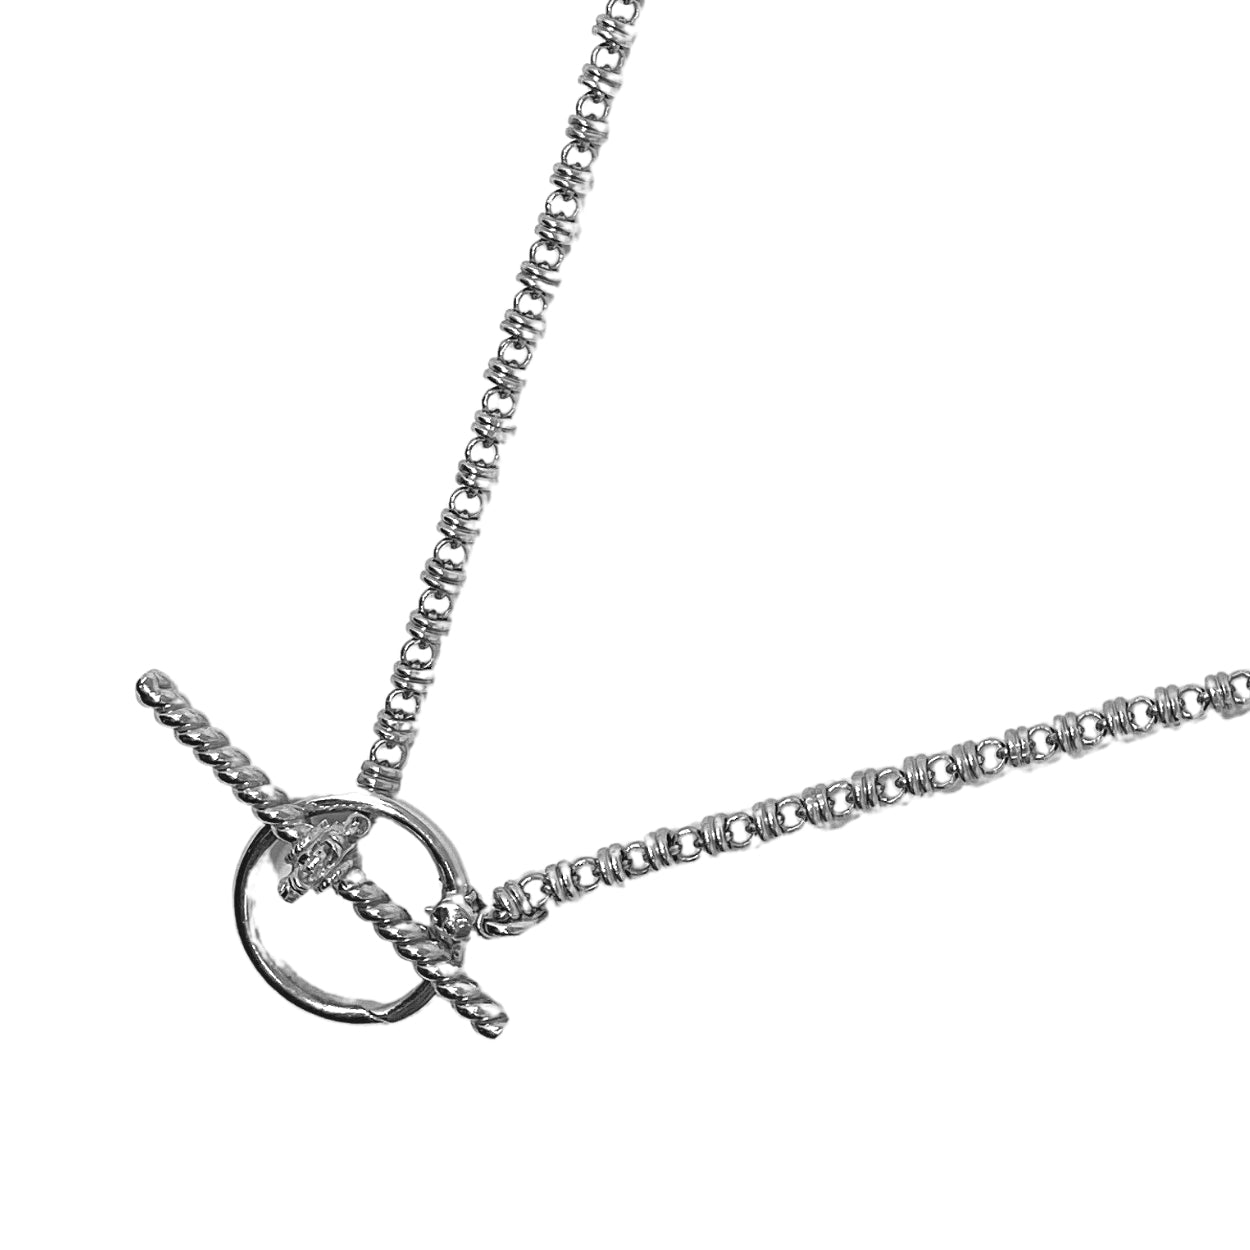 A closeup of the silver toggle clasp on a silver necklace - the silver chain is from the Links 3mm collection from DelBrenna Italian Jewelry designers and artisans. Hand-crafted in Tuscany.